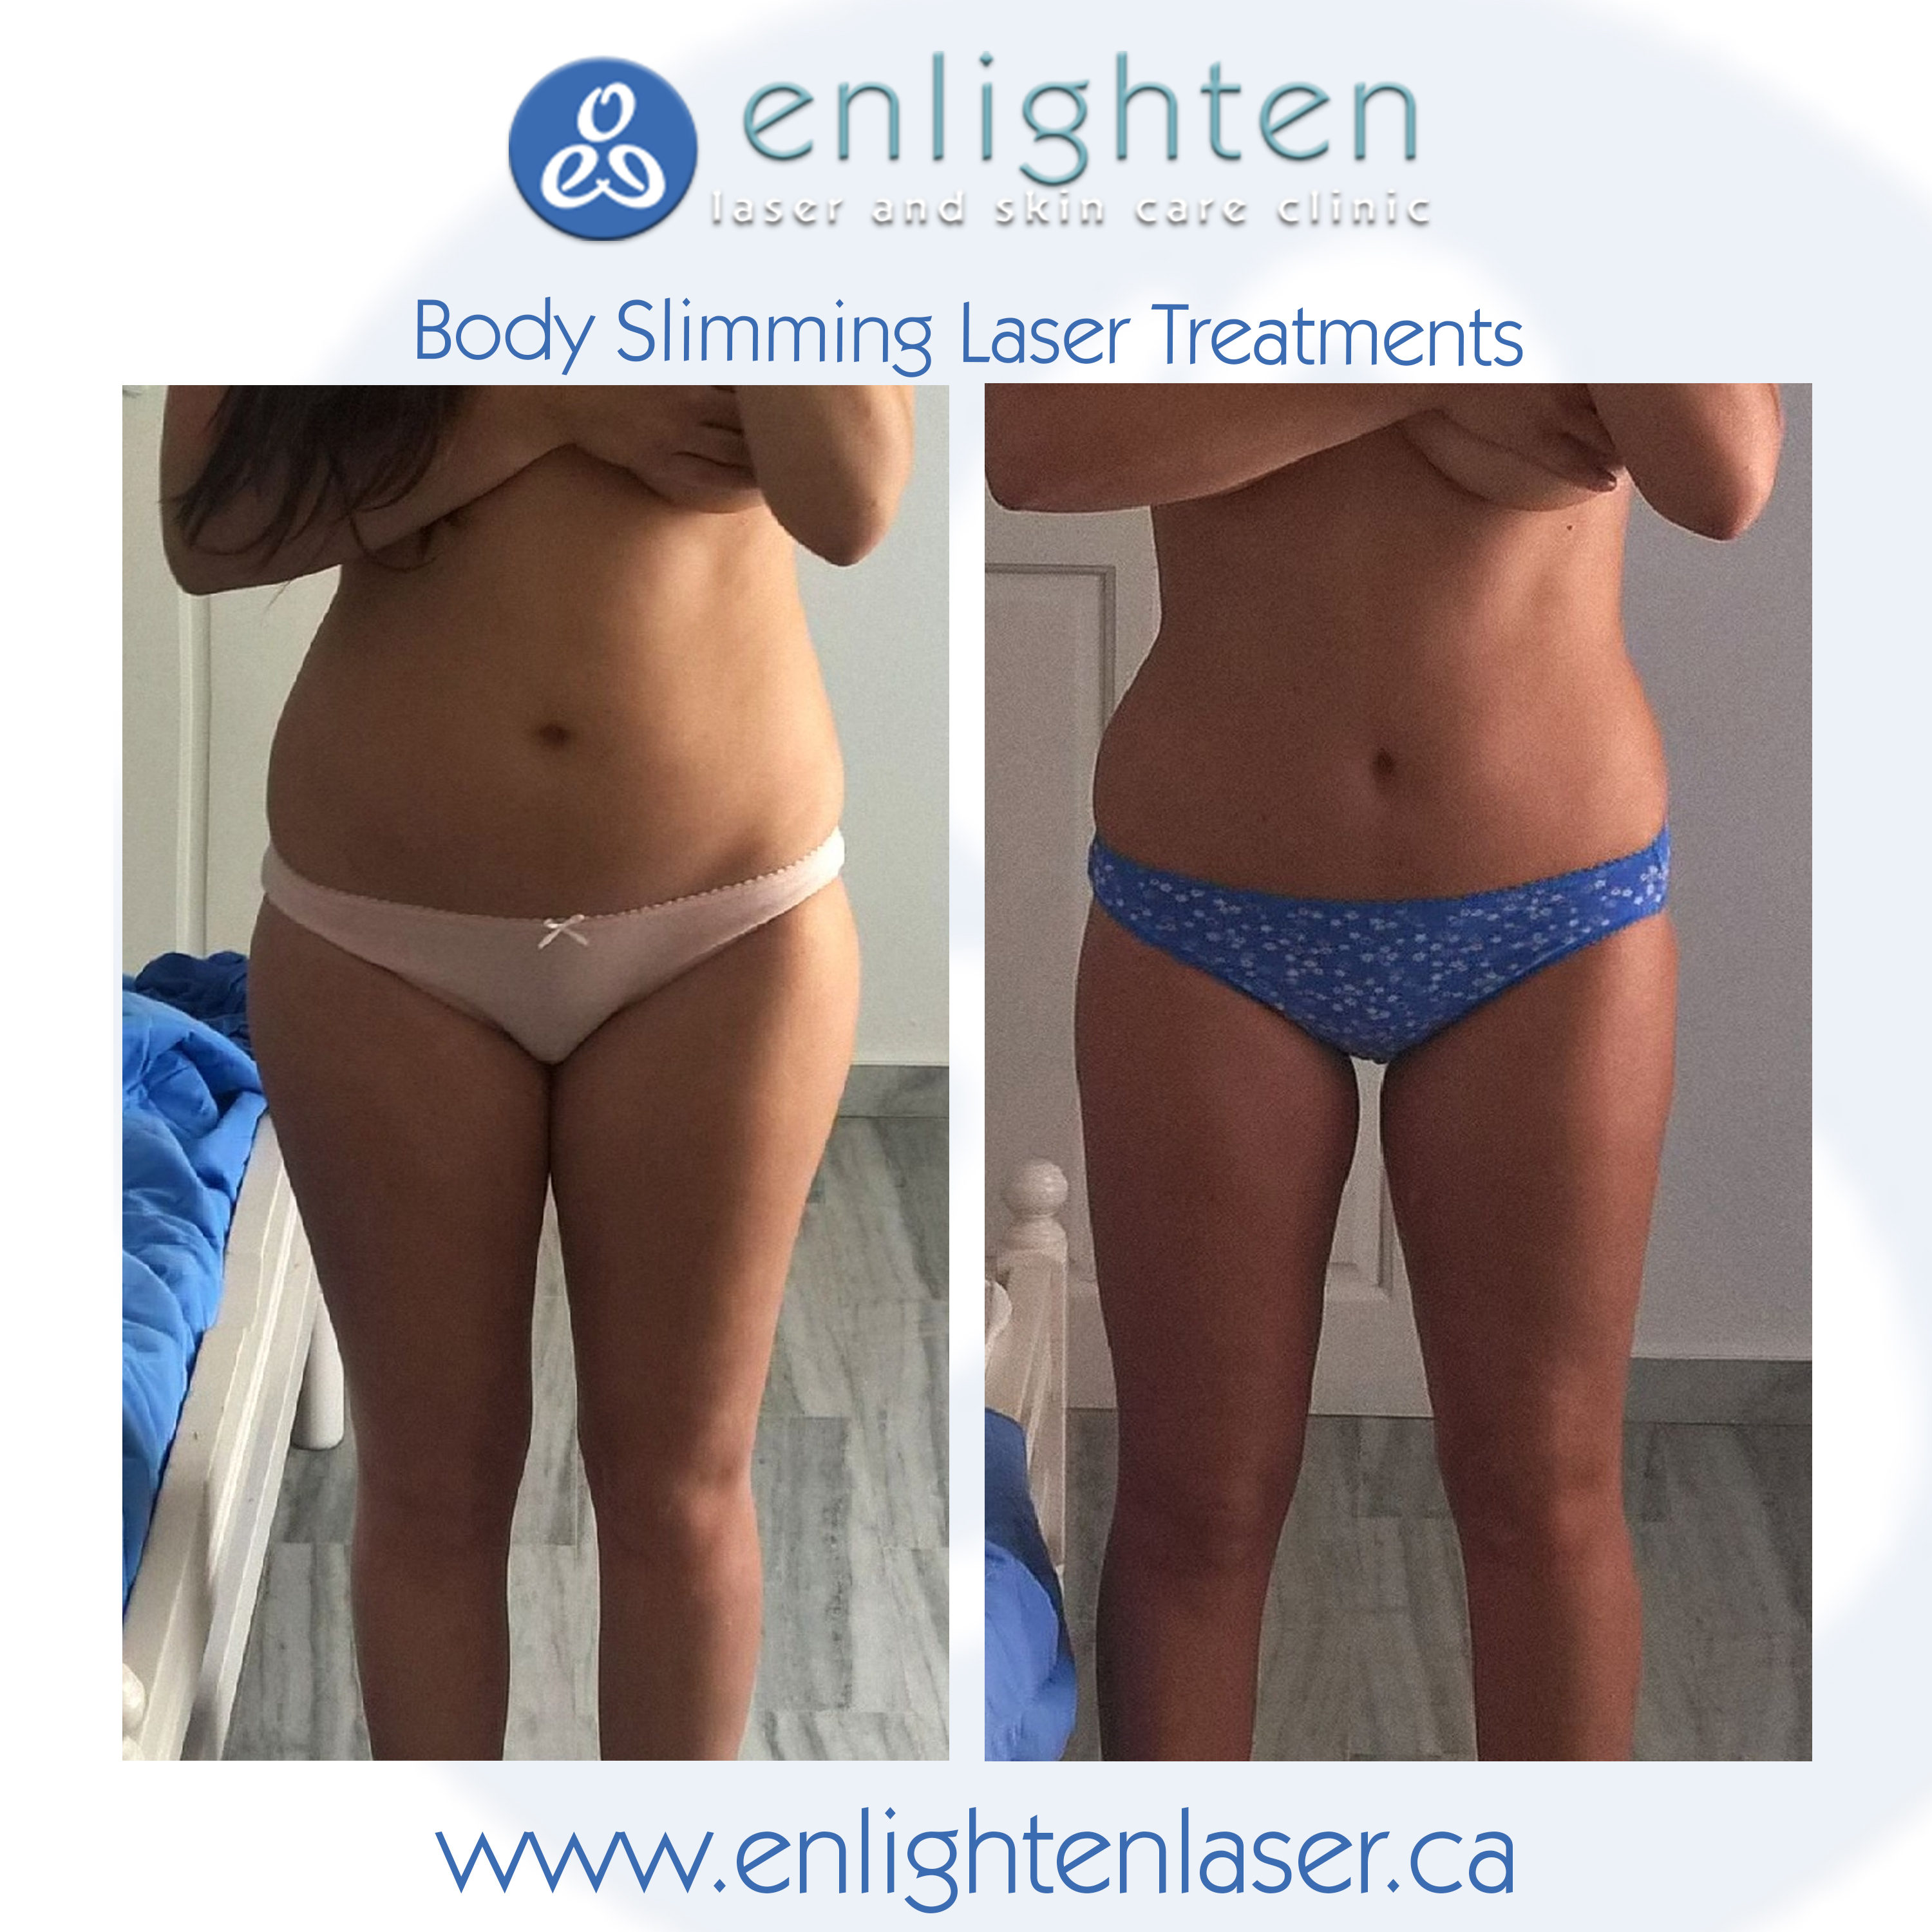 Body Slimming: What is it anyway?  Enlighten Laser and Skin Care